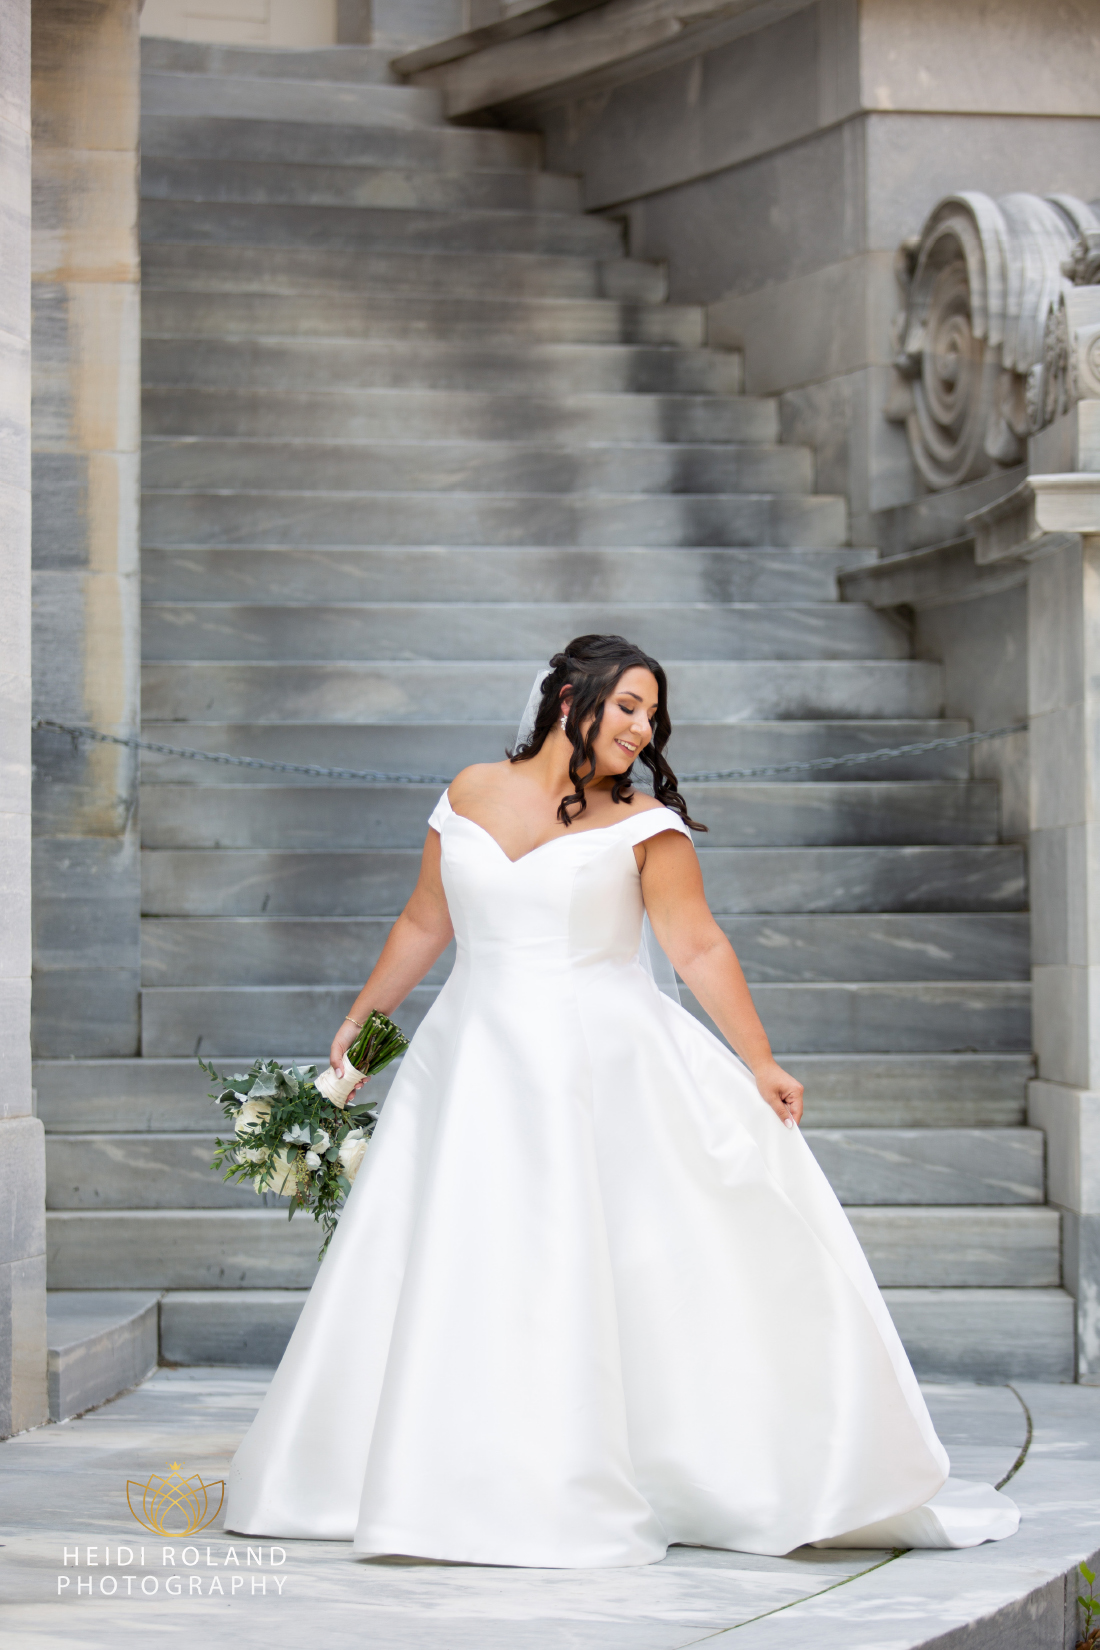 Bride in wedding dress by the steps of the Merchant Exchange building in philadelphia